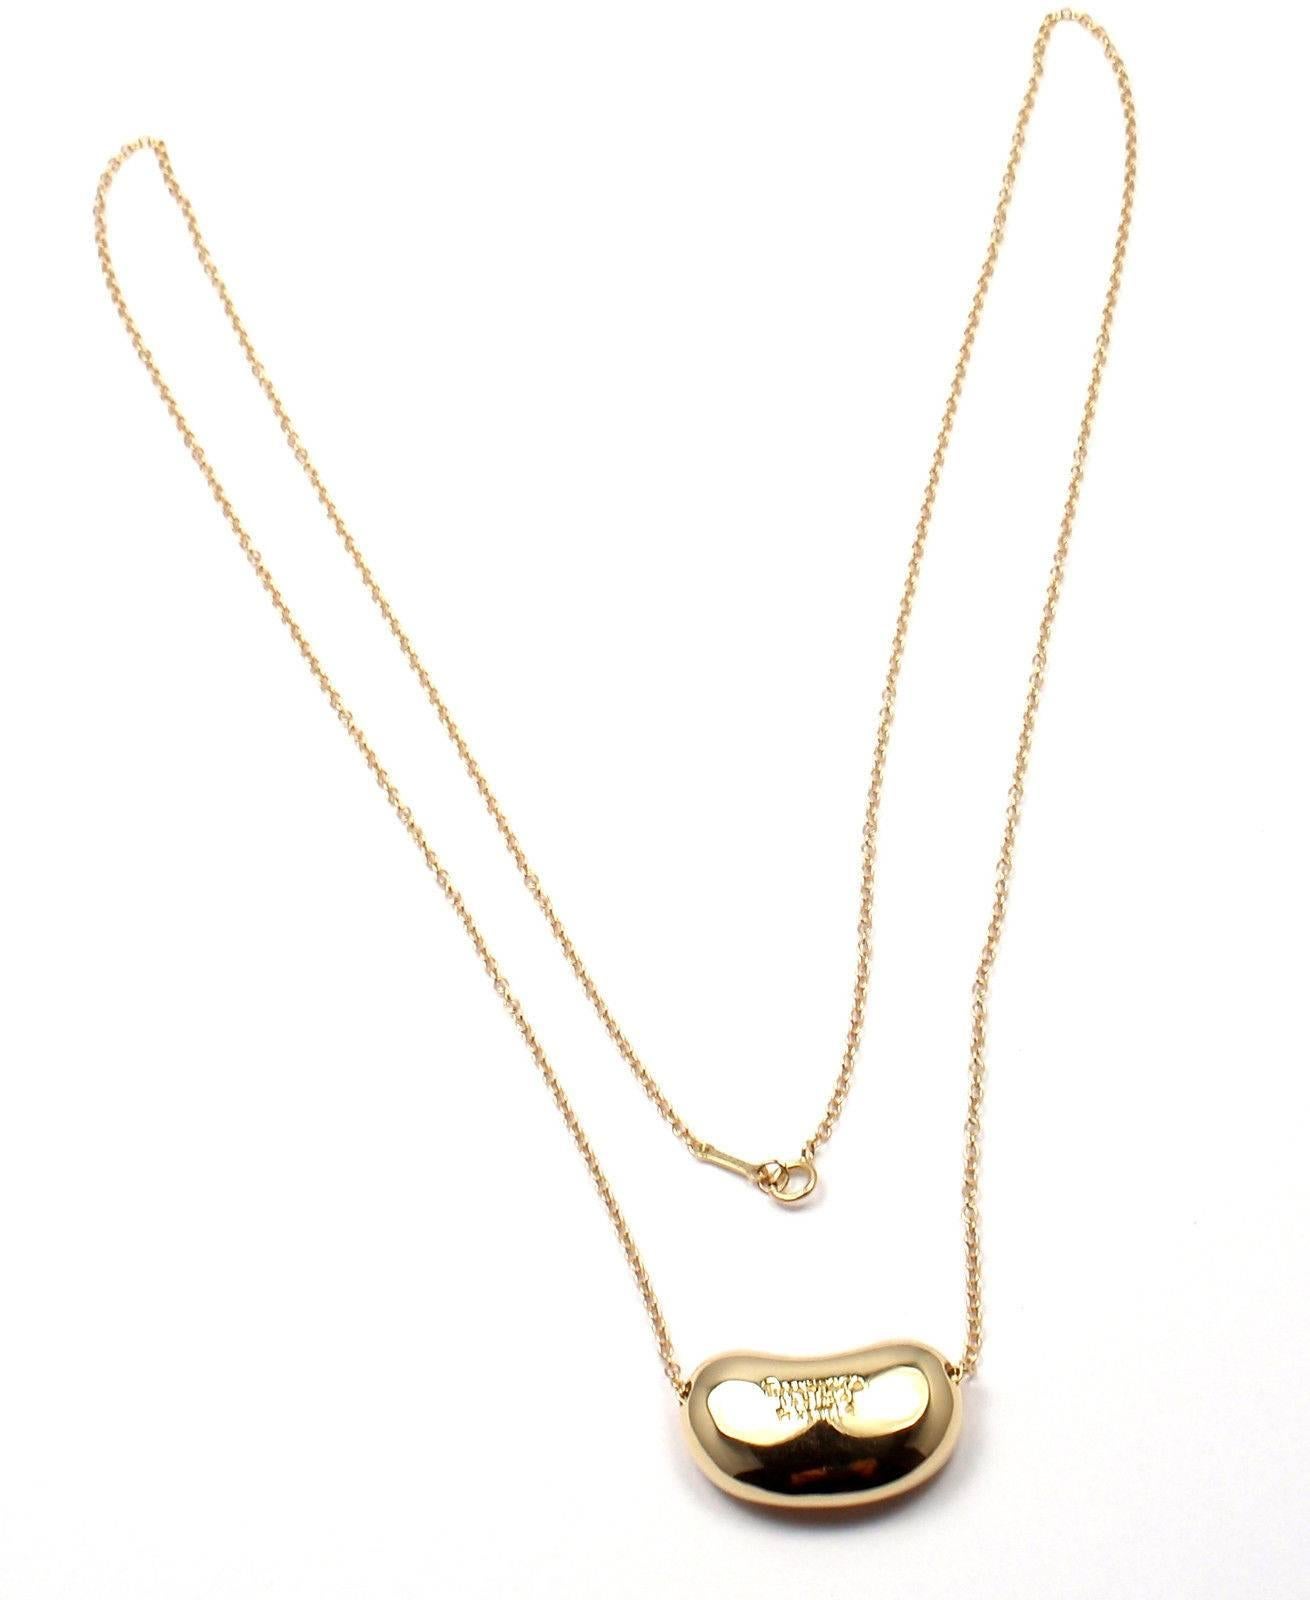 Tiffany & Co. Elsa Peretti Large Bean Yellow Gold Chain Necklace 3